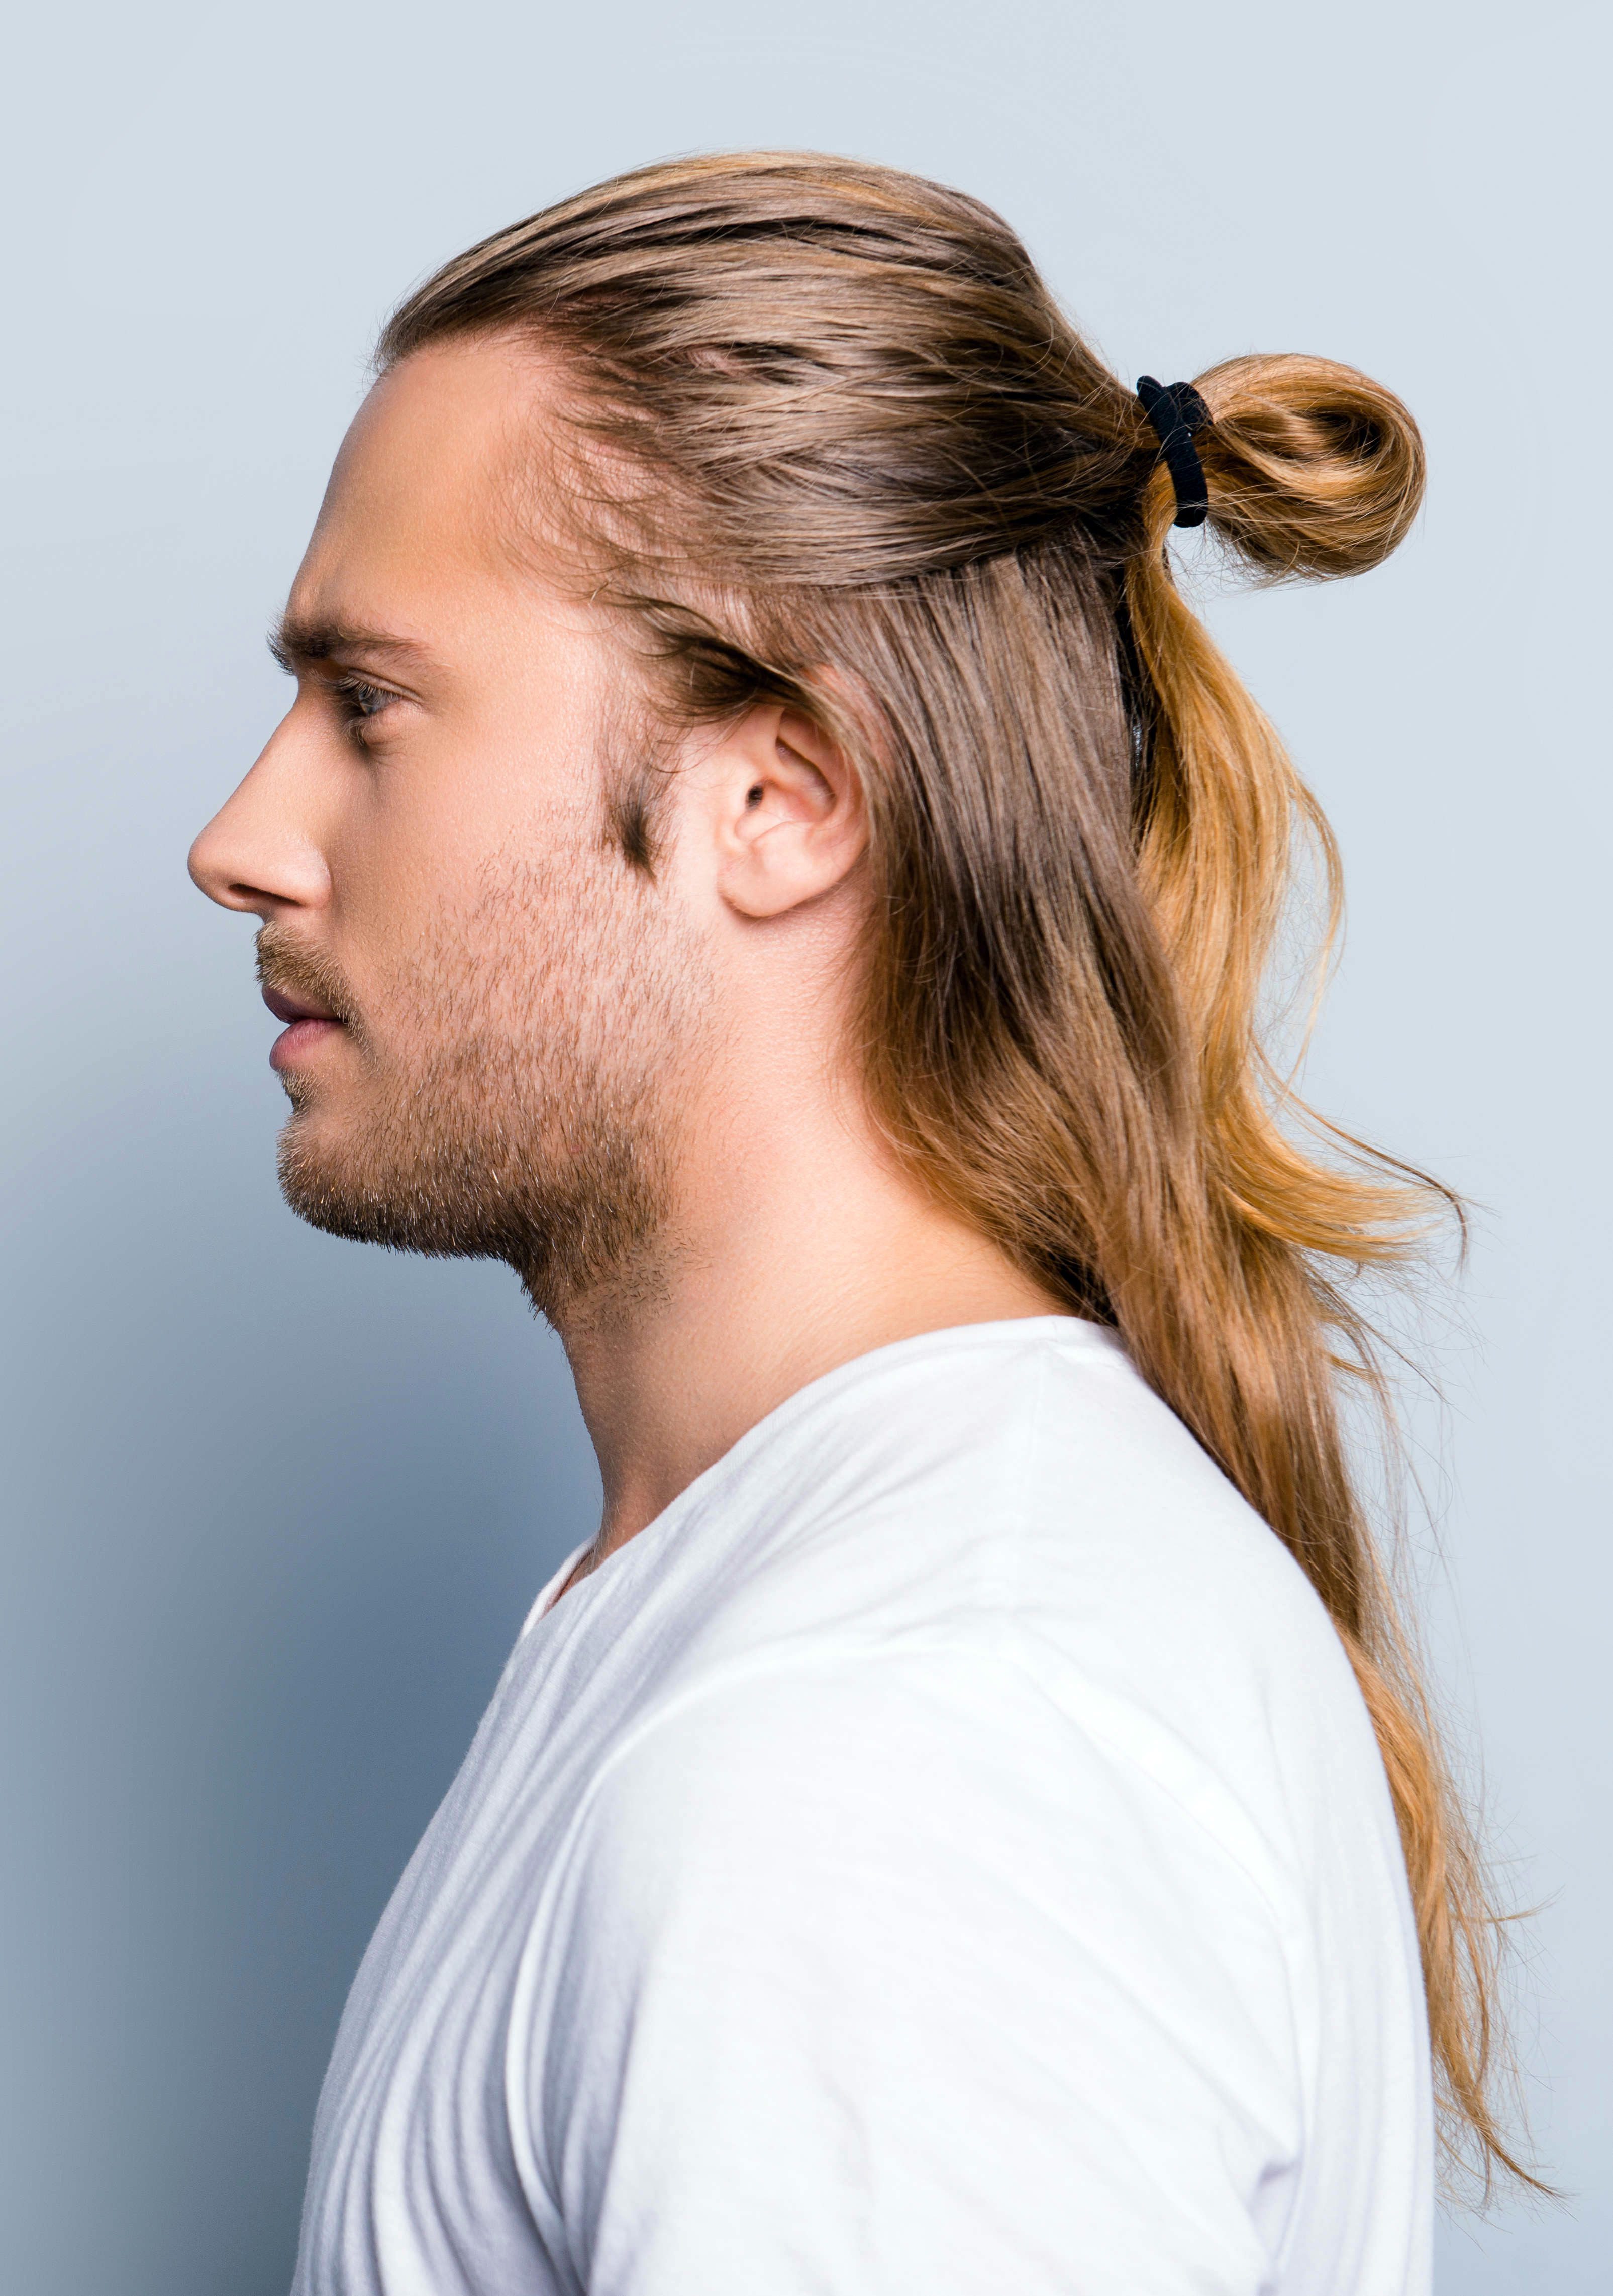 7 Types of Man Bun Hairstyles | Gallery + How To